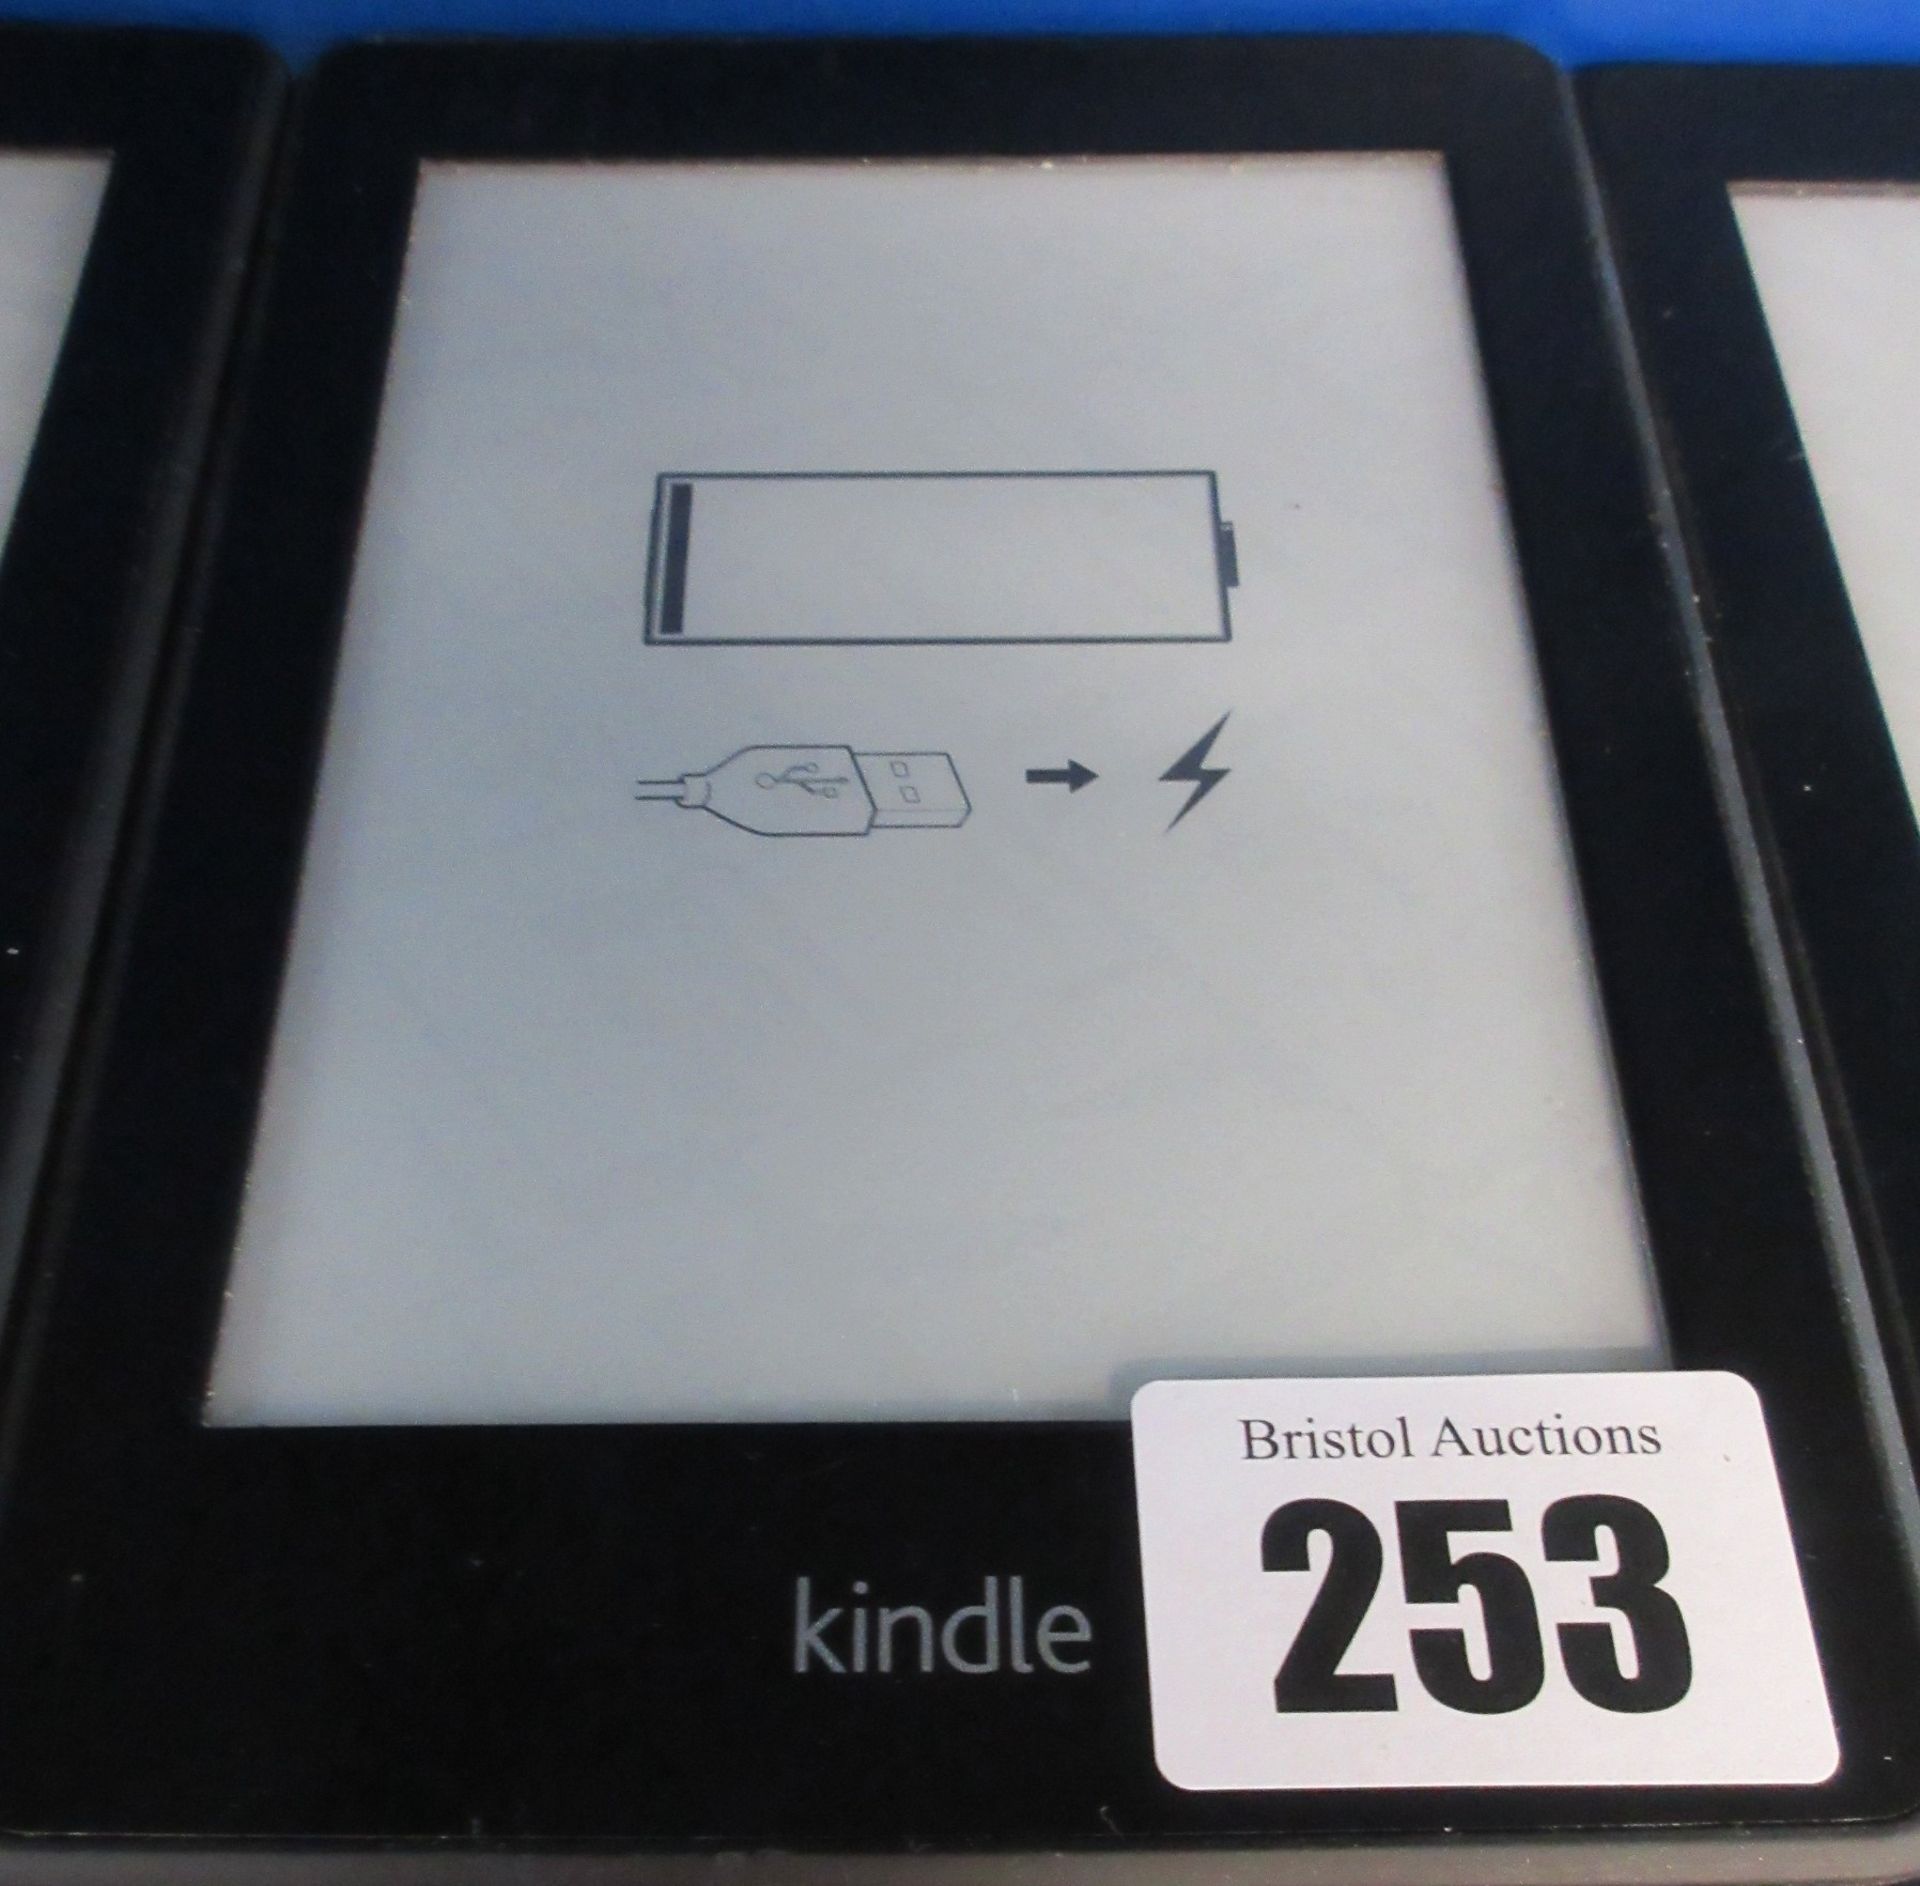 A pre-owned Amazon Kindle Paperwhite (EY21) 6” E-Reader in Black.